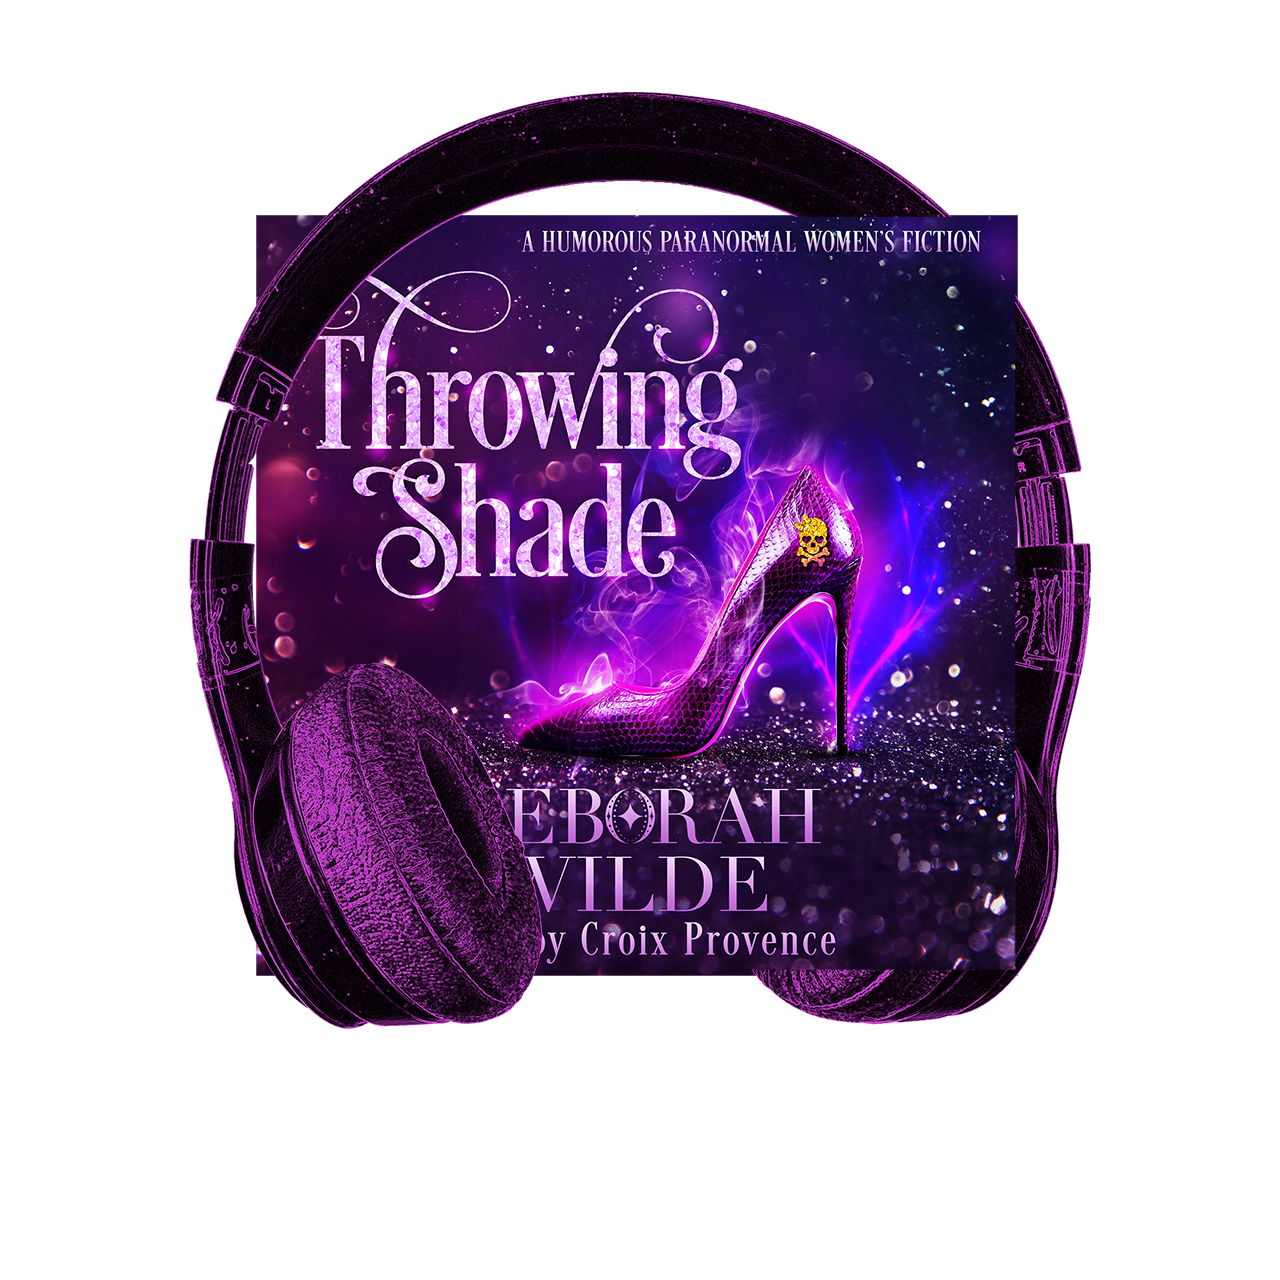 Throwing Shade, a funny, sexy, urban fantasy audiobook by Deborah Wilde. Read by Croix Provence.